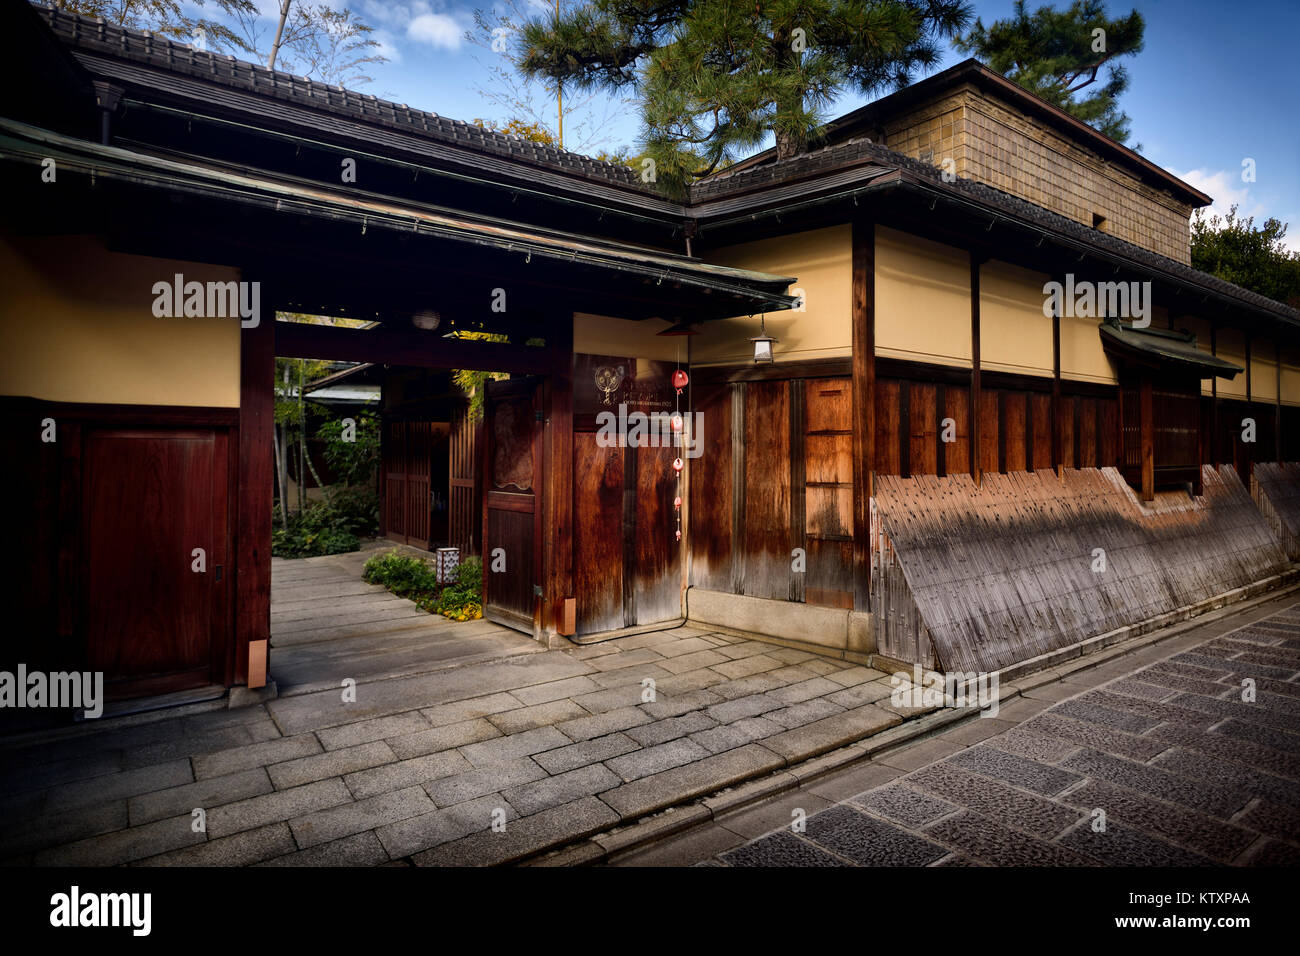 Licenza e stampe a MaximImages.com - Historic Streets of Gion, Kyoto, Japan Travel stock foto Foto Stock